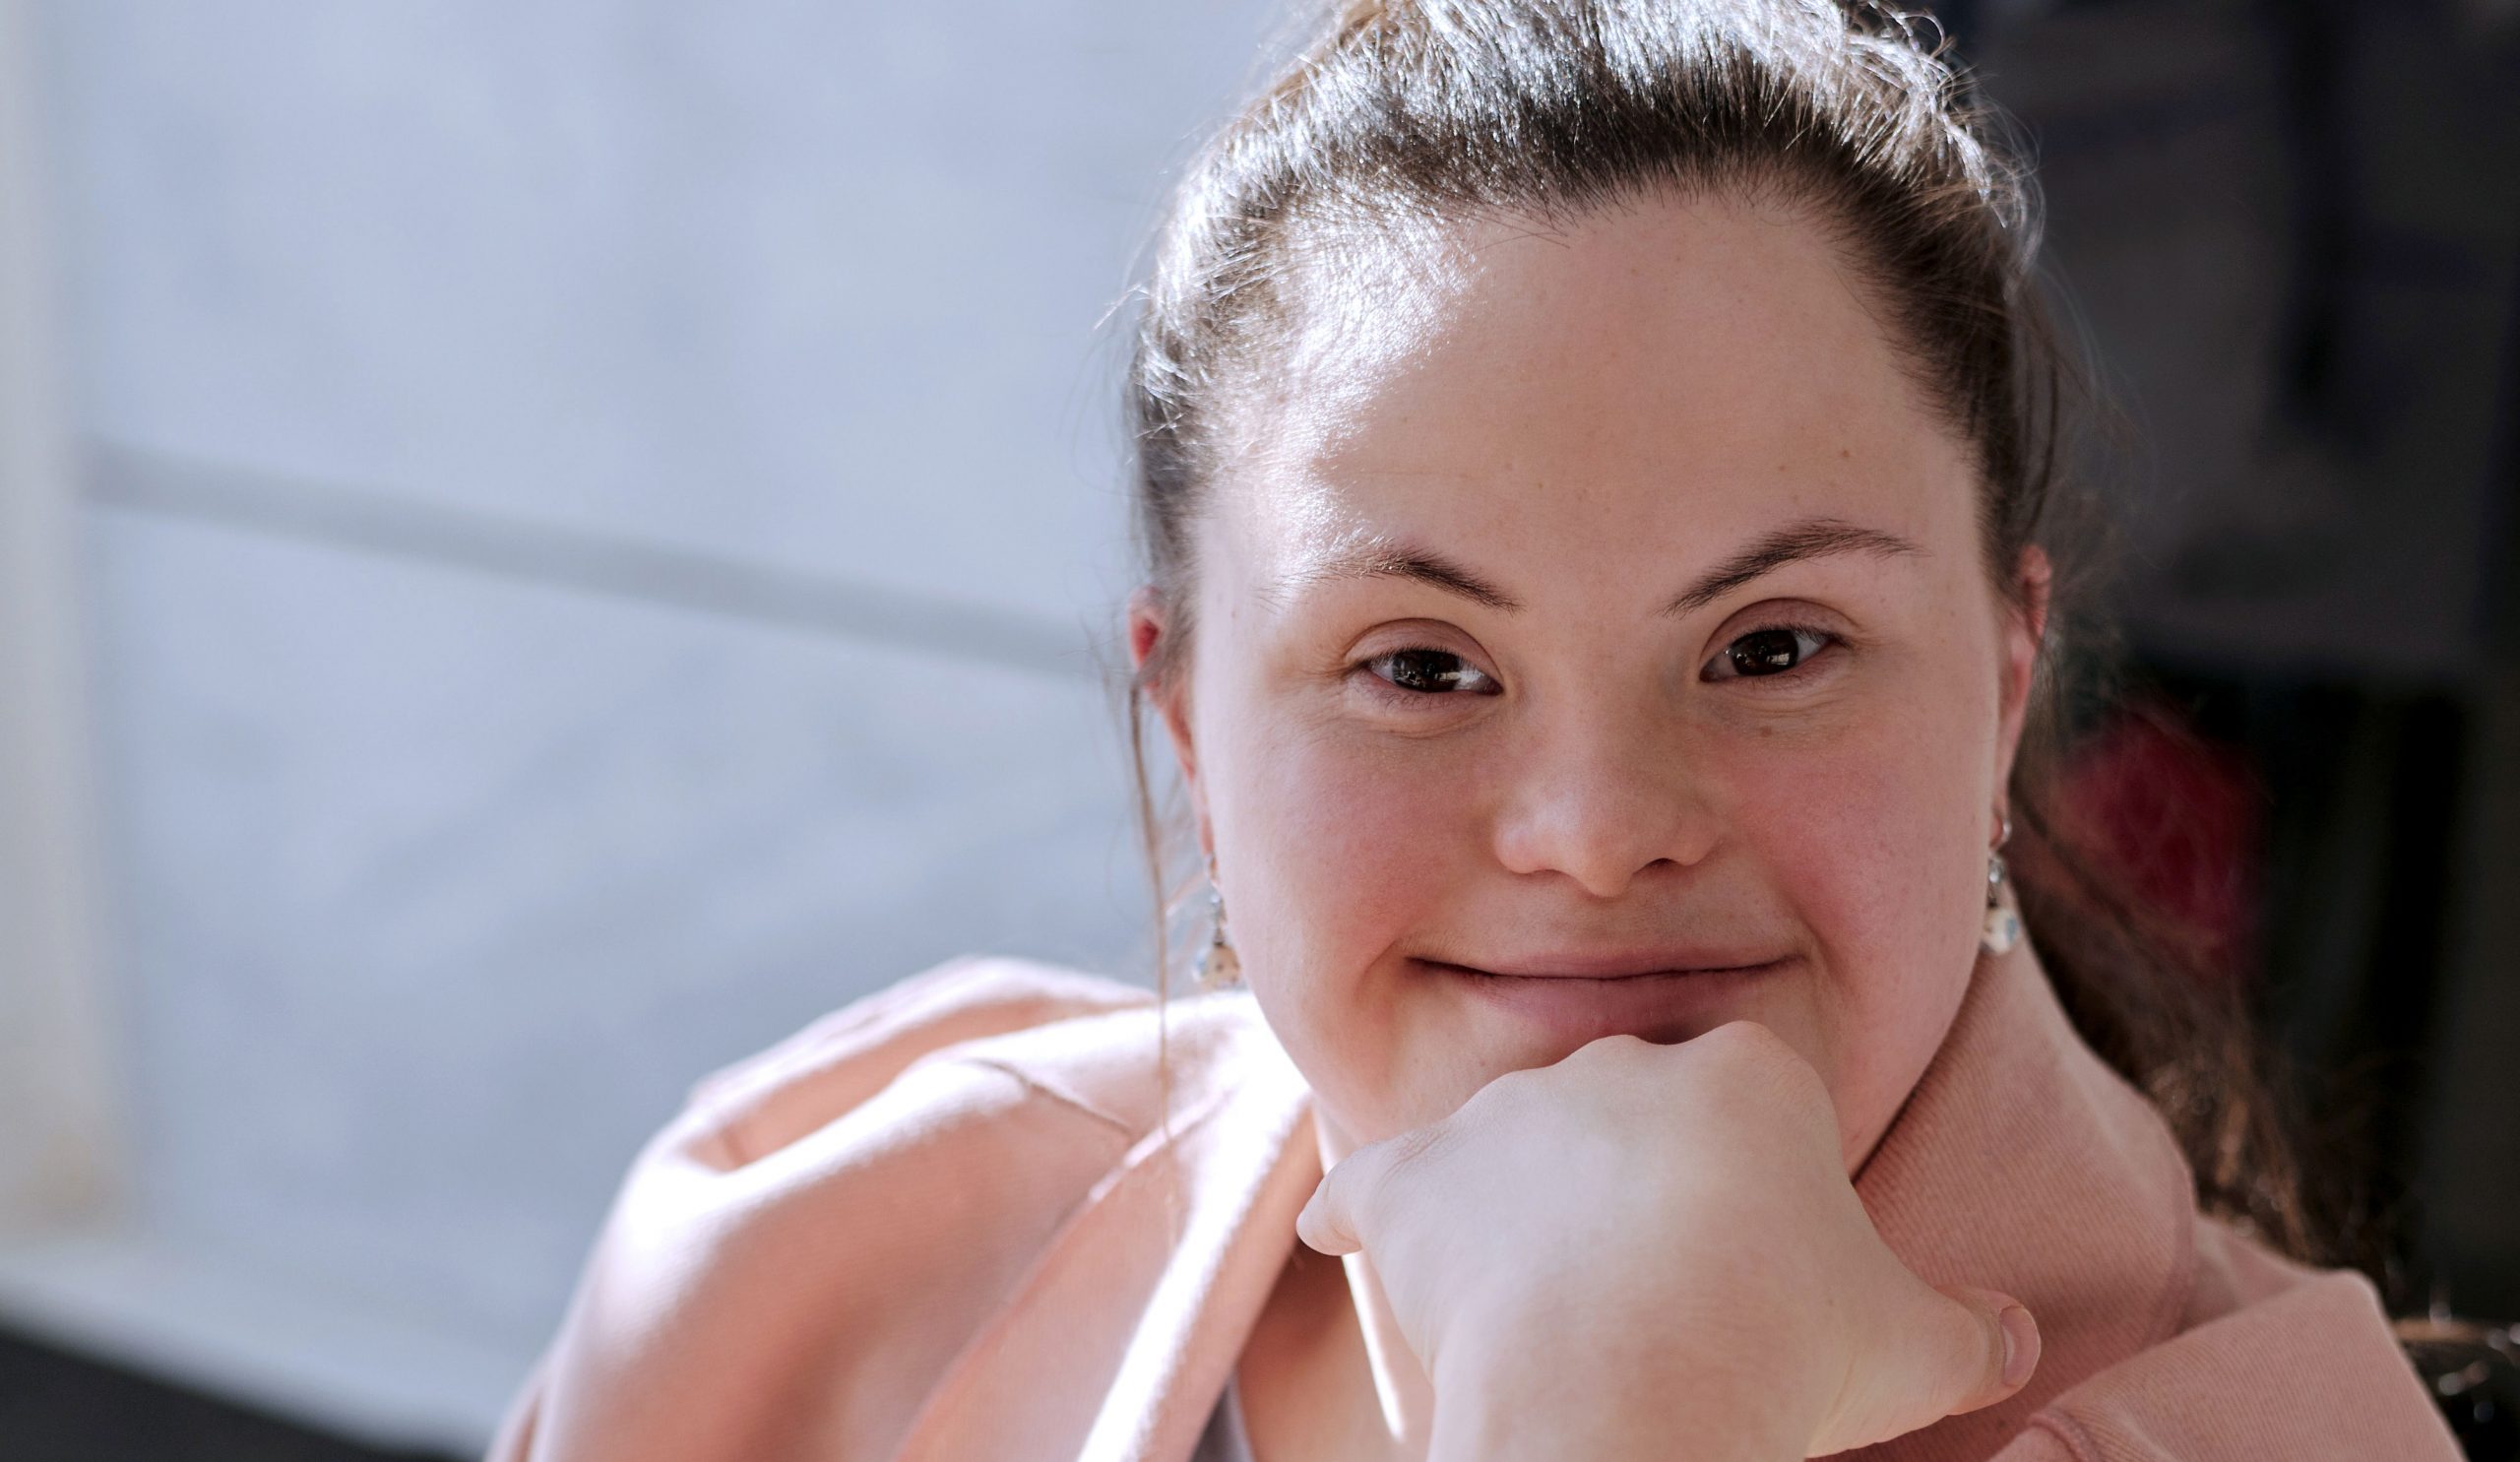 A female with down syndrome smiling